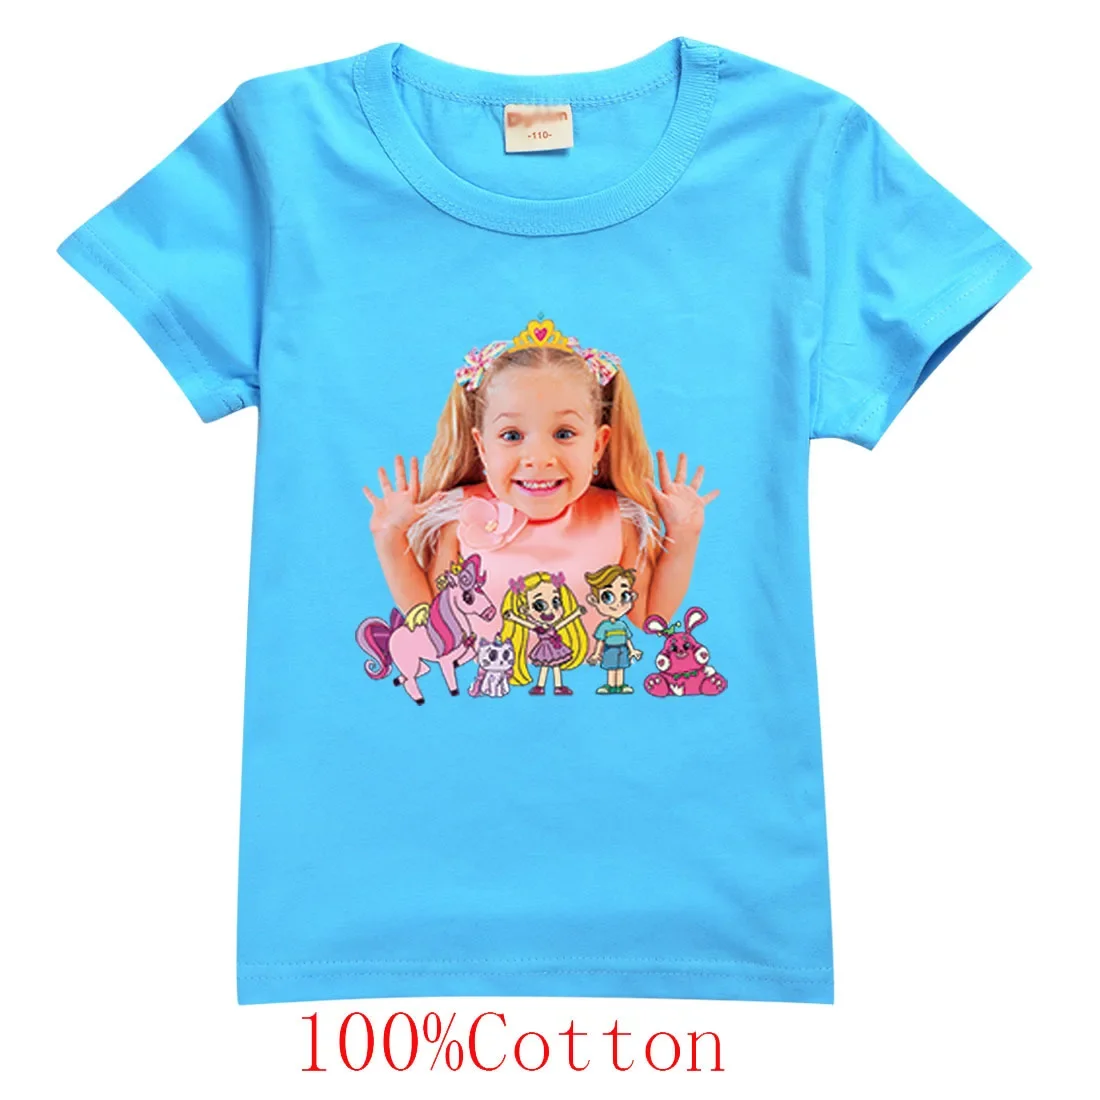 

Cute Roma Y Diana Show Clothes Kids Cotton T-shirts Baby Girls Short Sleeve Tops Teenager Boys O-neck Tshirts Children Clothing